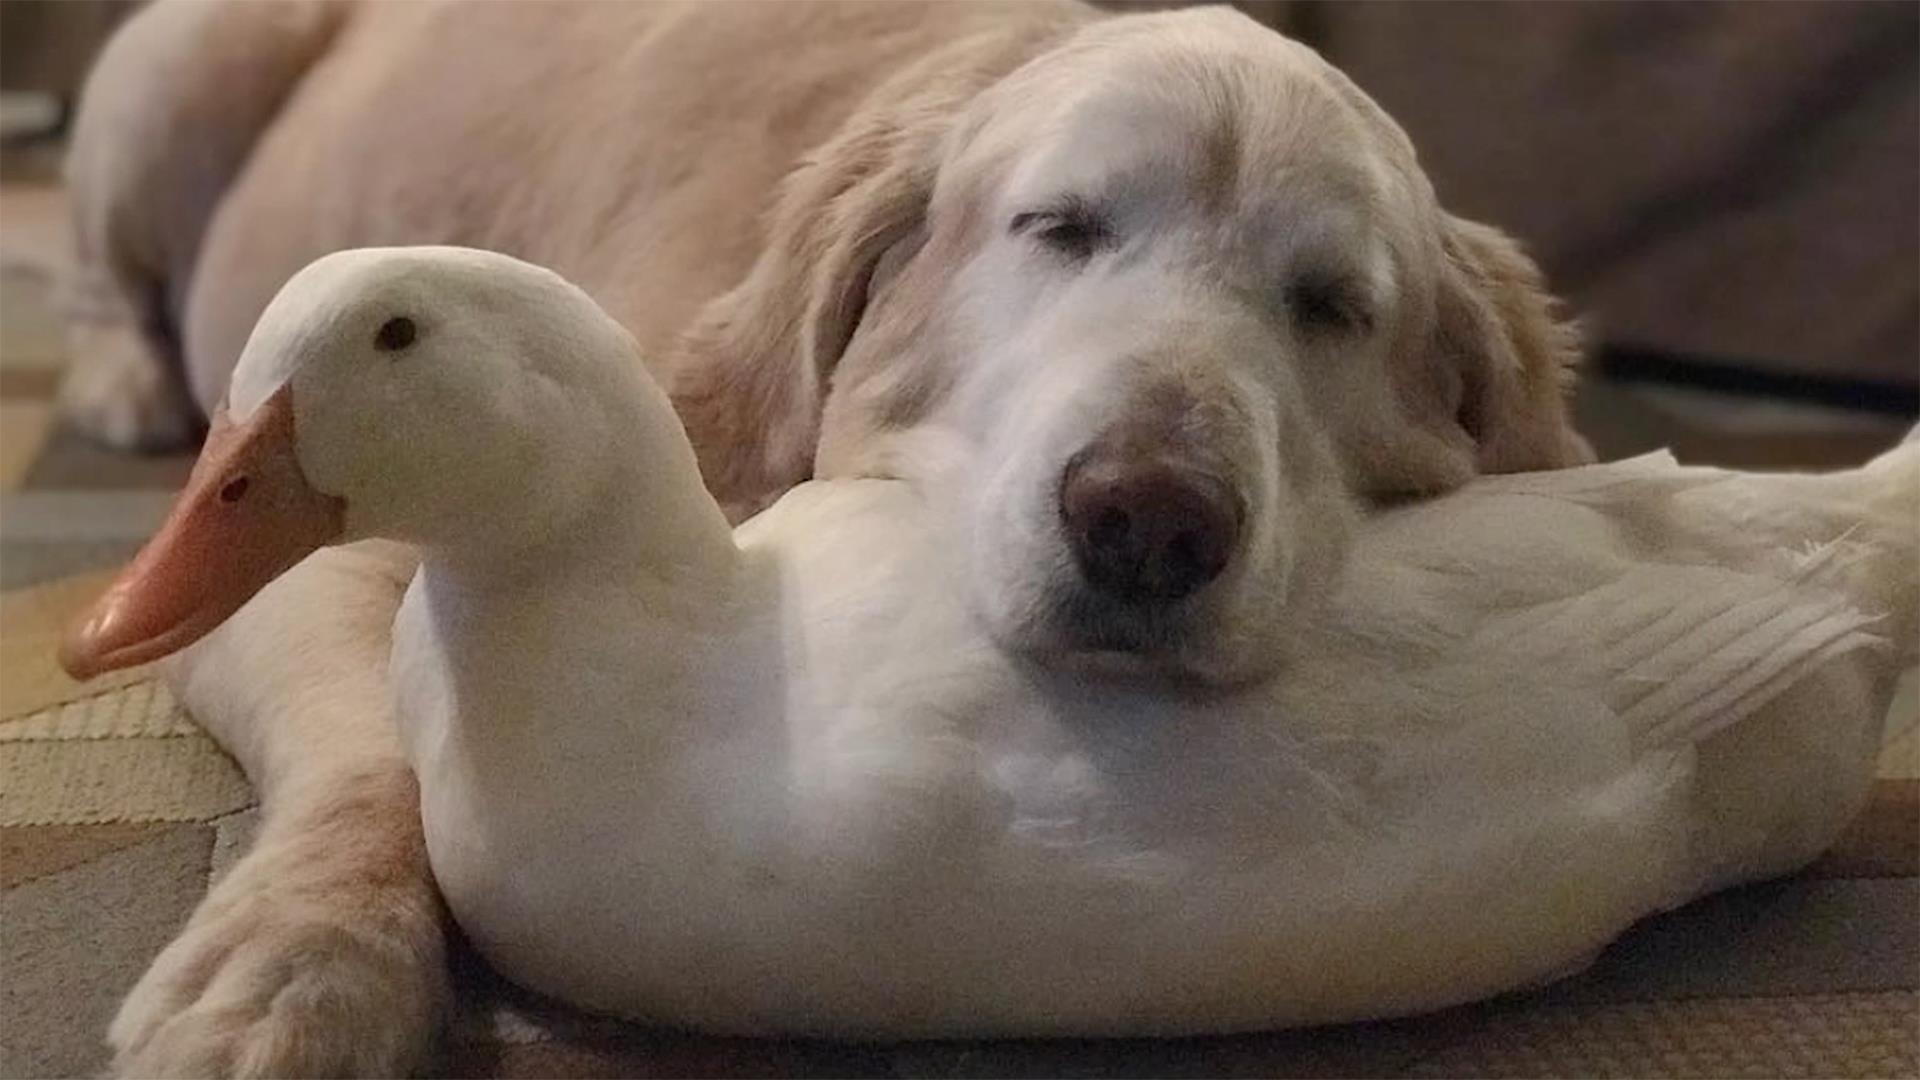 See dog and ducks’ loving, unlikely friendship